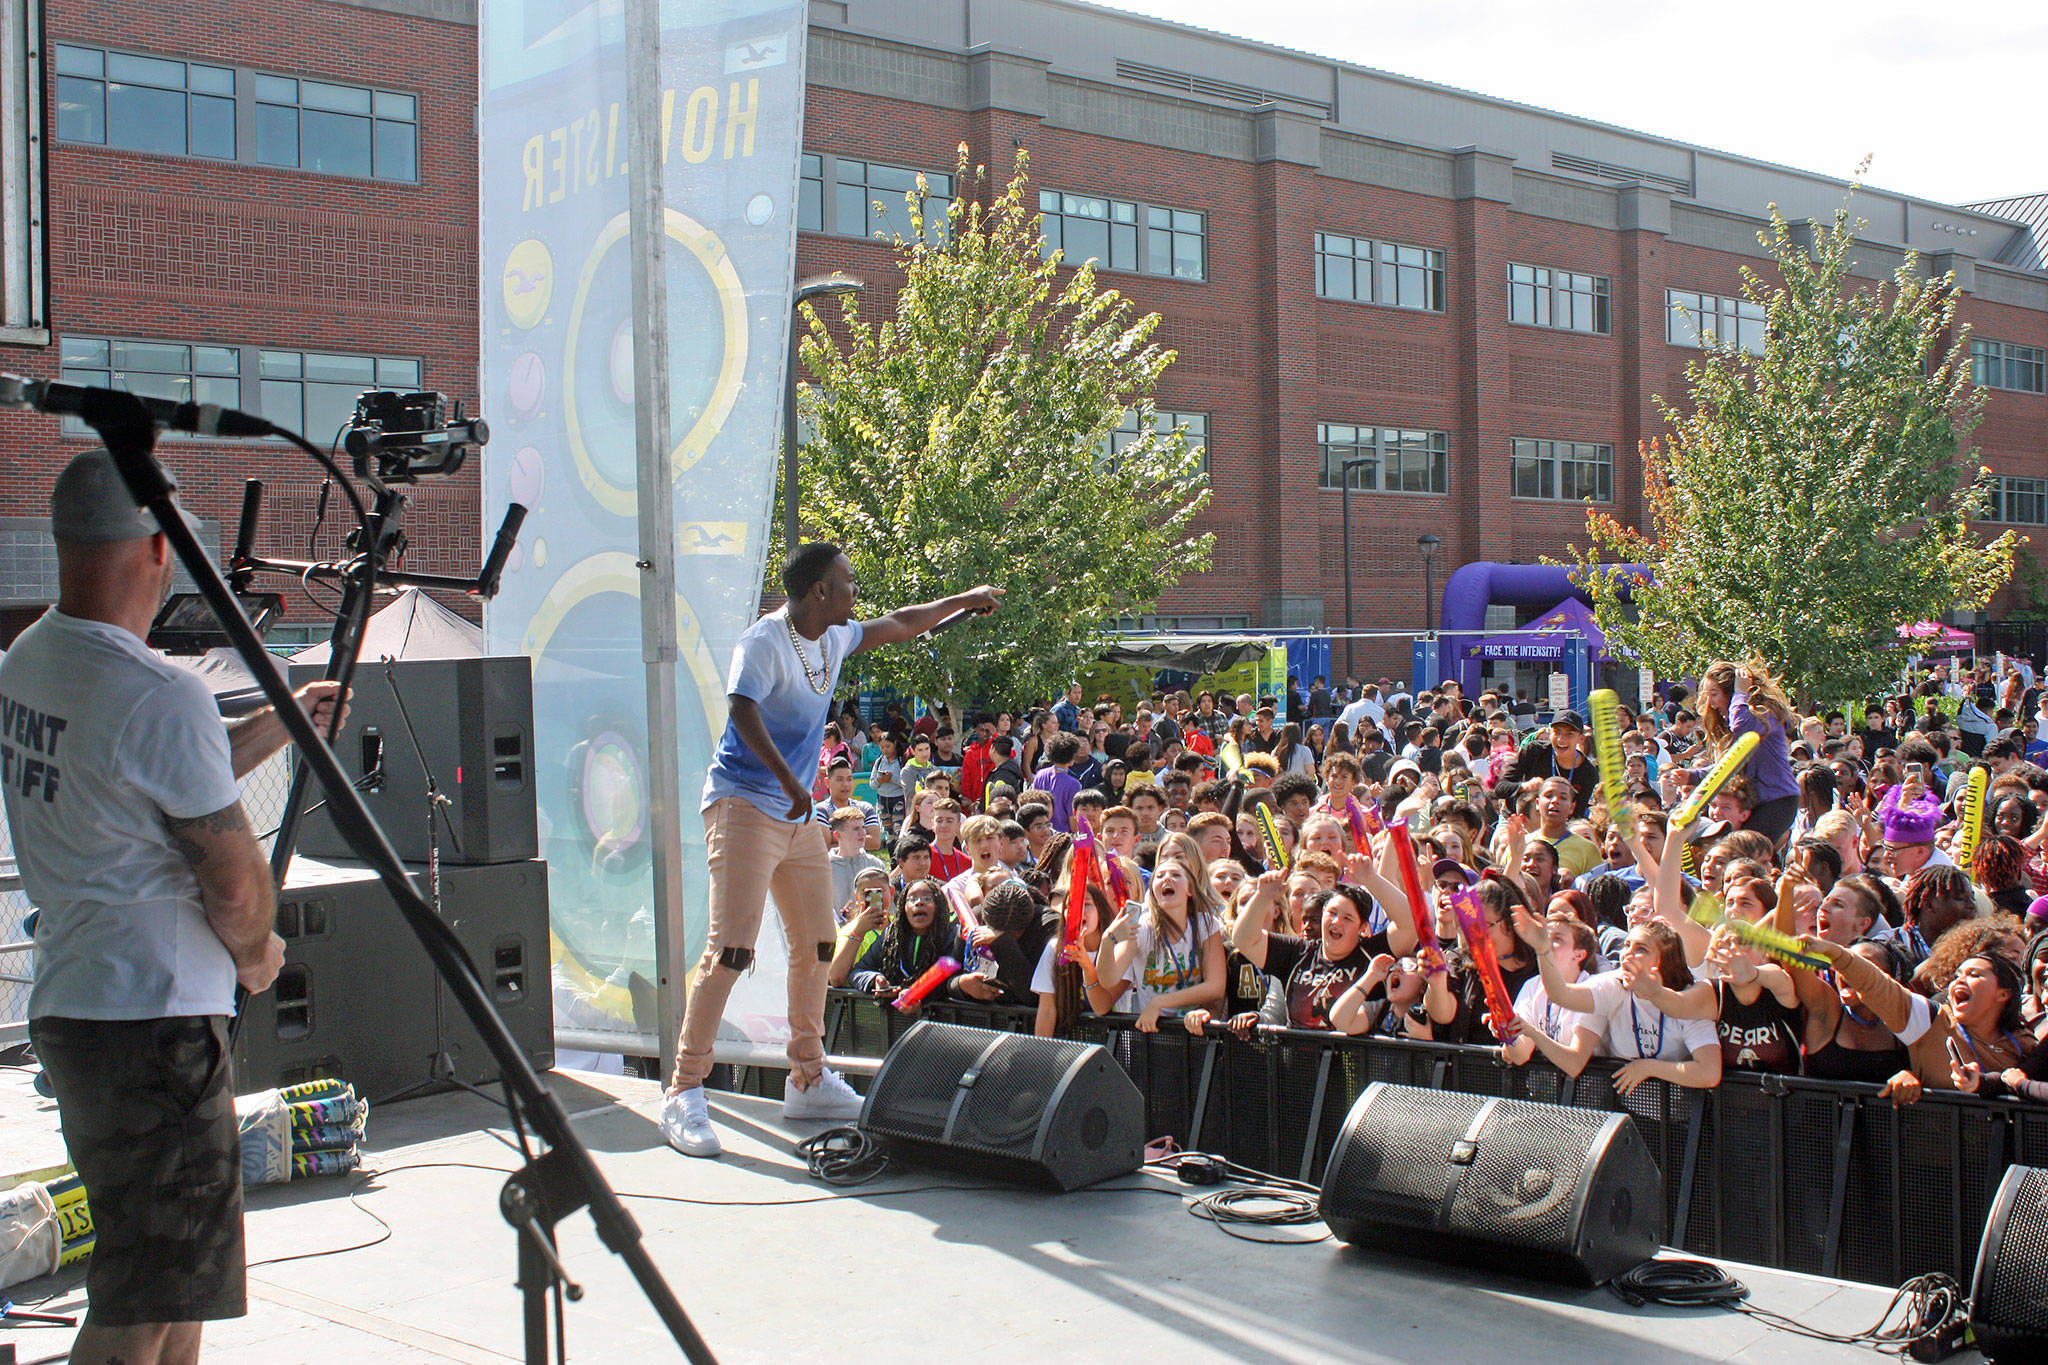 Baltimore-based Rapper Lil Key sings his heart out for all 1,700 of Auburn High School’s students Wednesday afternoon, Sept. 11, during a lunchtime performance on the school’s southeast parking lot. Lil Key was one of four acts that the California-based non-profit High School Nation brought to the high school last week. ROBERT WHALE, Auburn Reporter